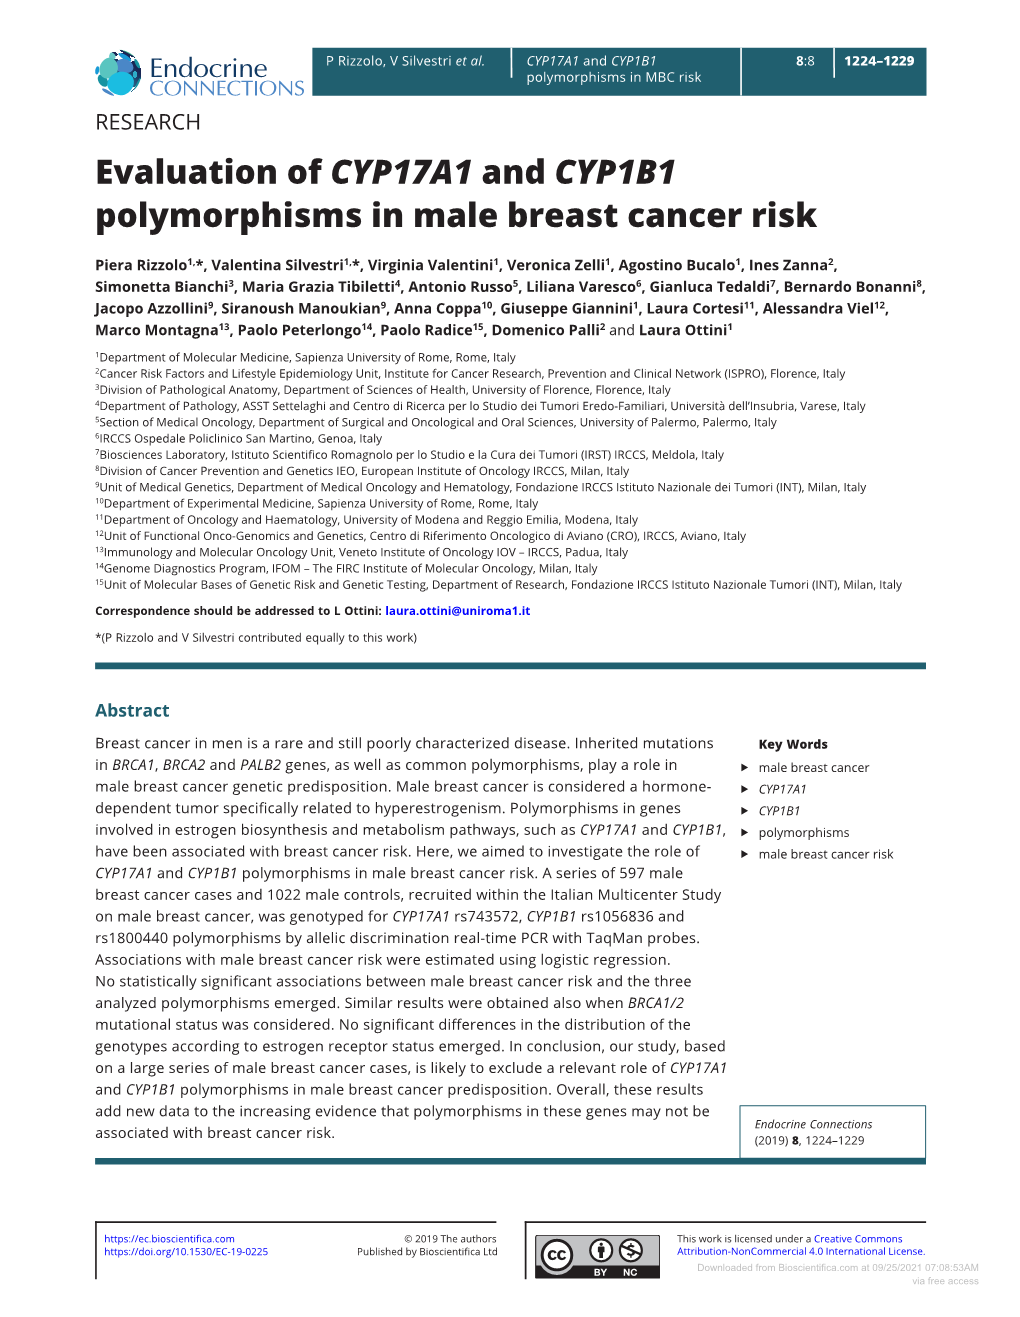 Evaluation of CYP17A1 and CYP1B1 Polymorphisms in Male Breast Cancer Risk